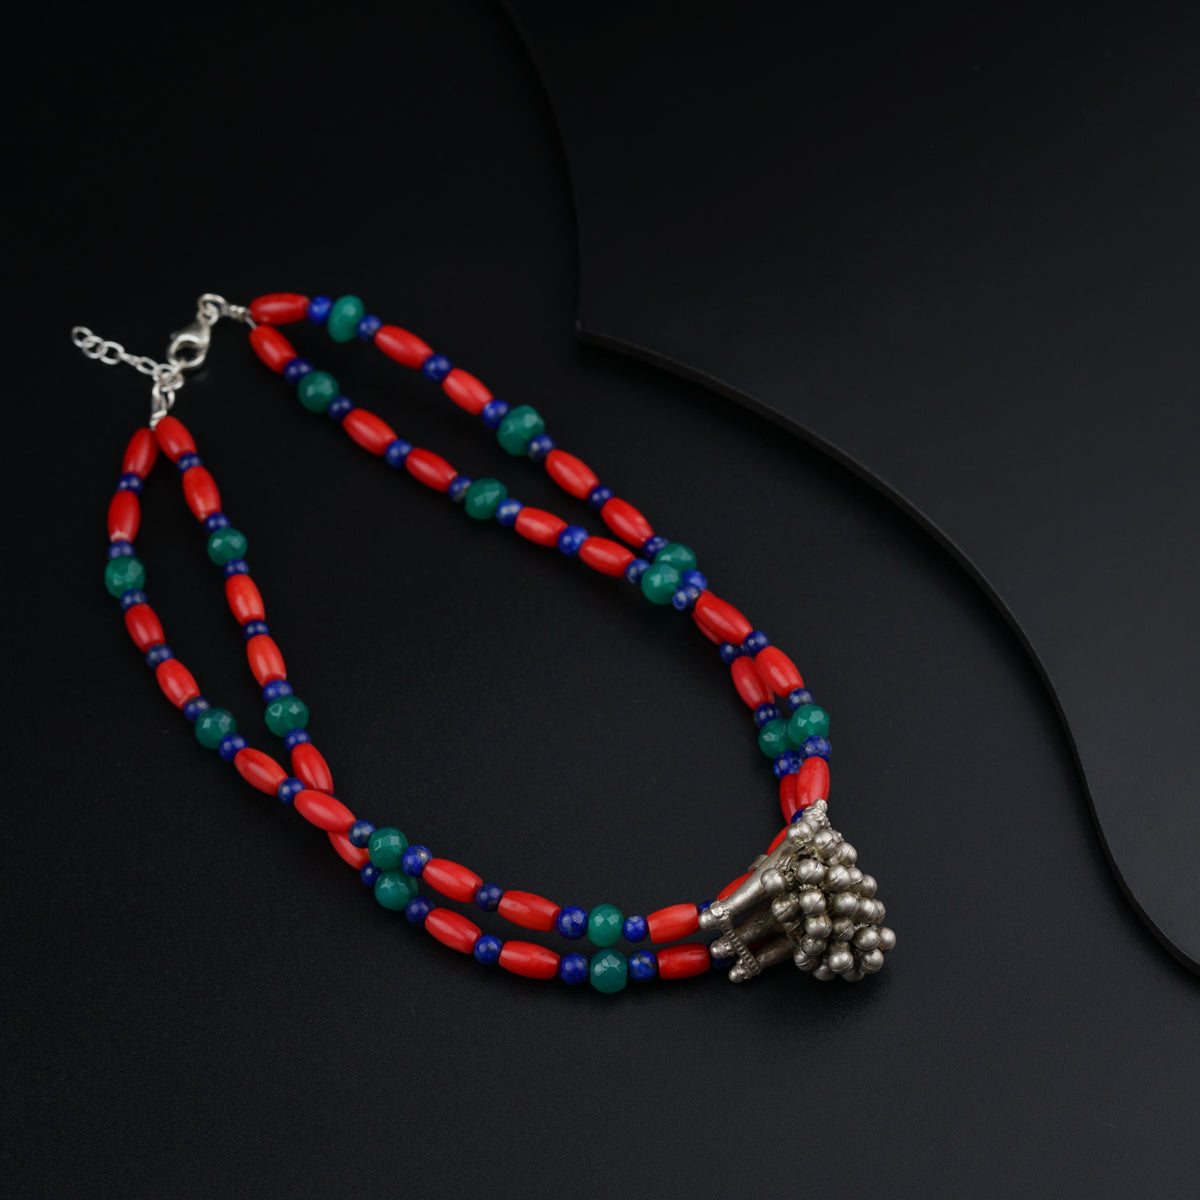 a red, blue and green beaded necklace on a black surface